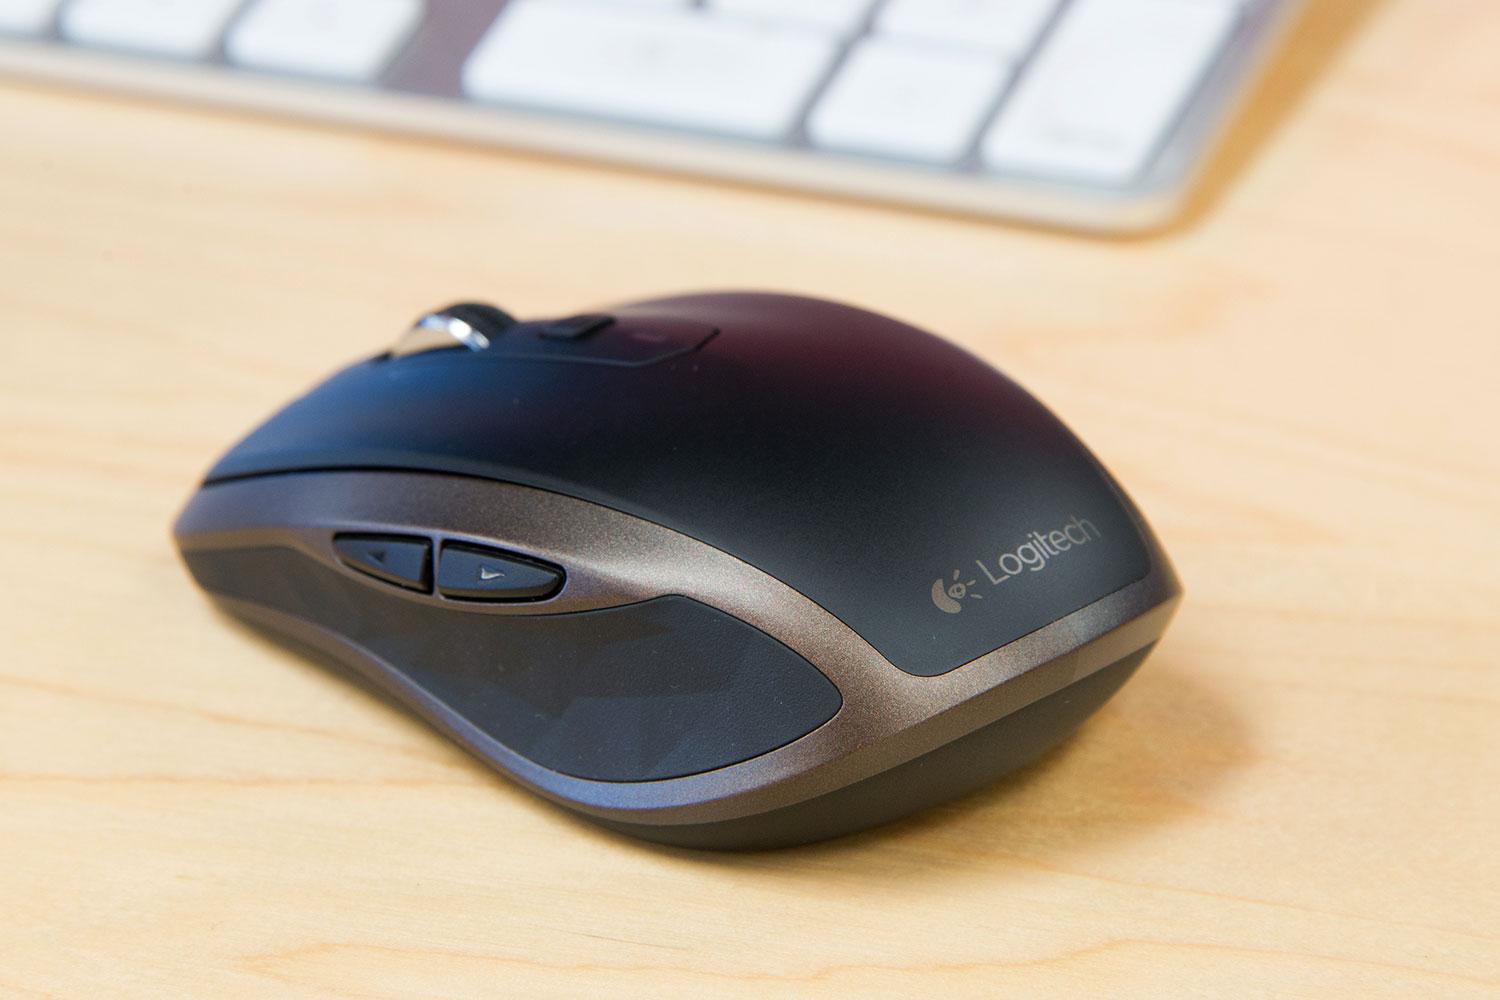 MX Anywhere 2 Mouse Review | Digital